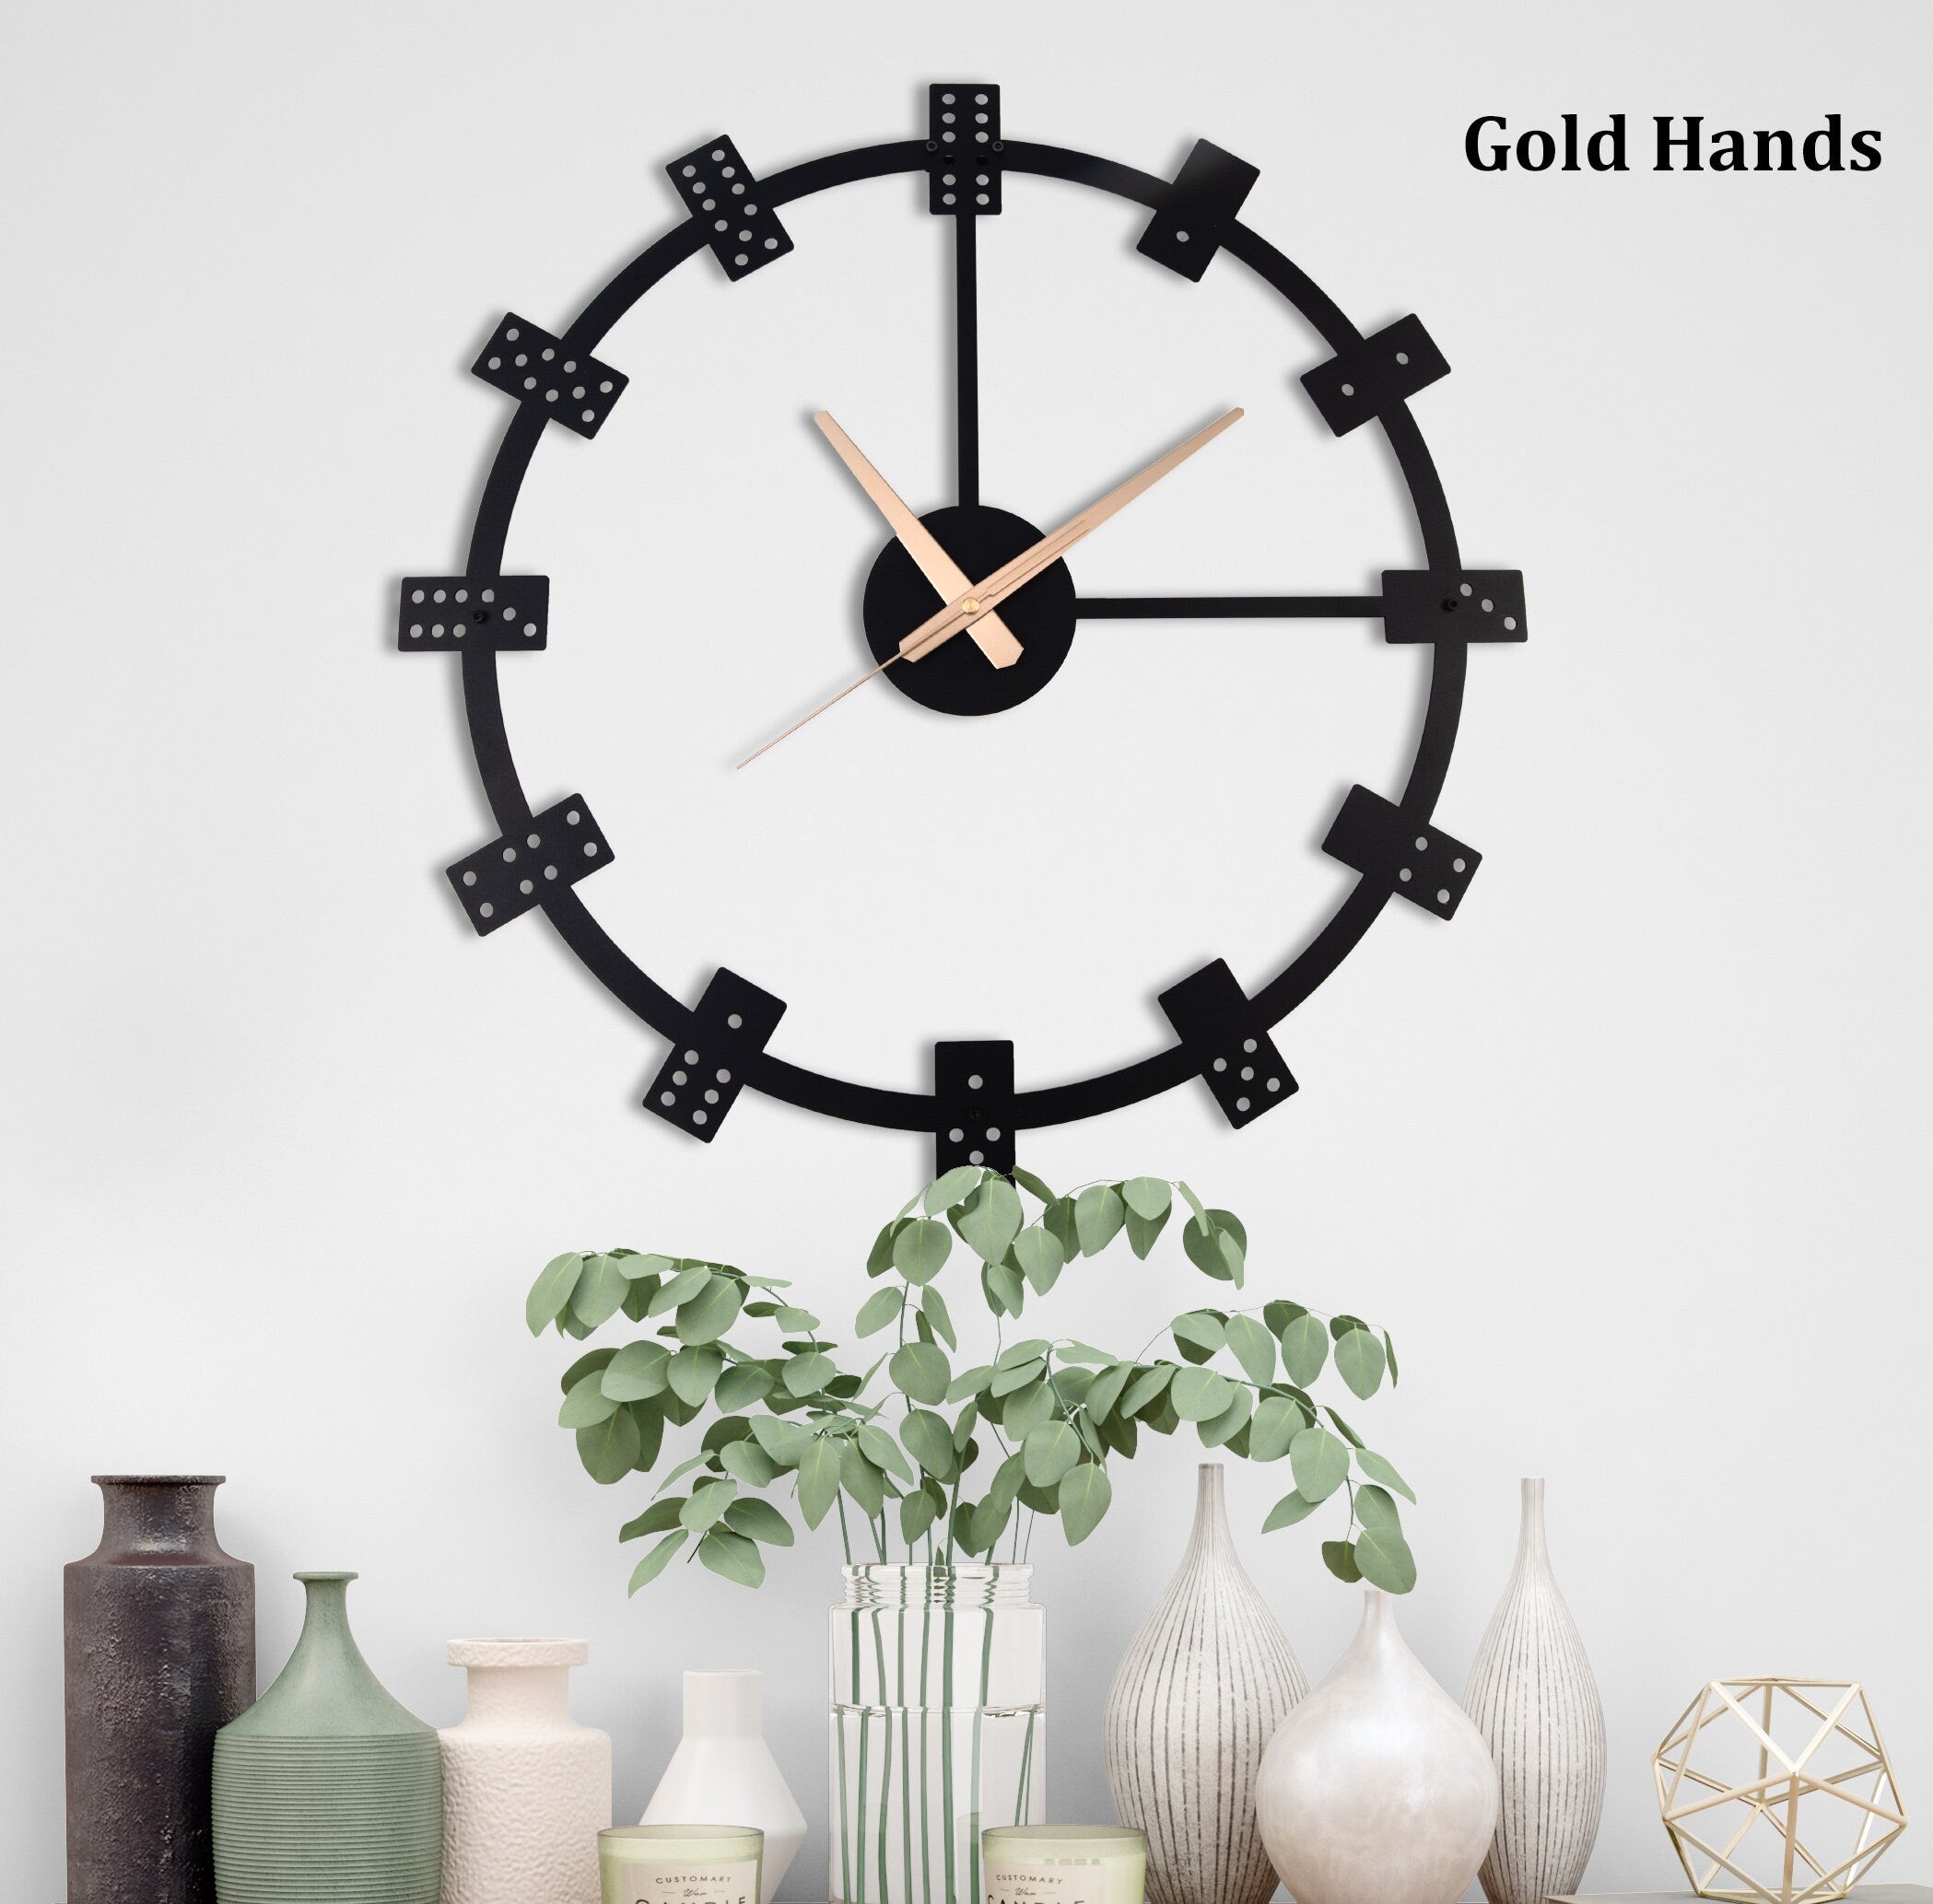 Domino Modern Wall Clock, Metal Wall Clock, Home Decor And Gifts, Unique Wall Clock, Game Room Clock, Oversized Wall Clock, Clocks For Wall